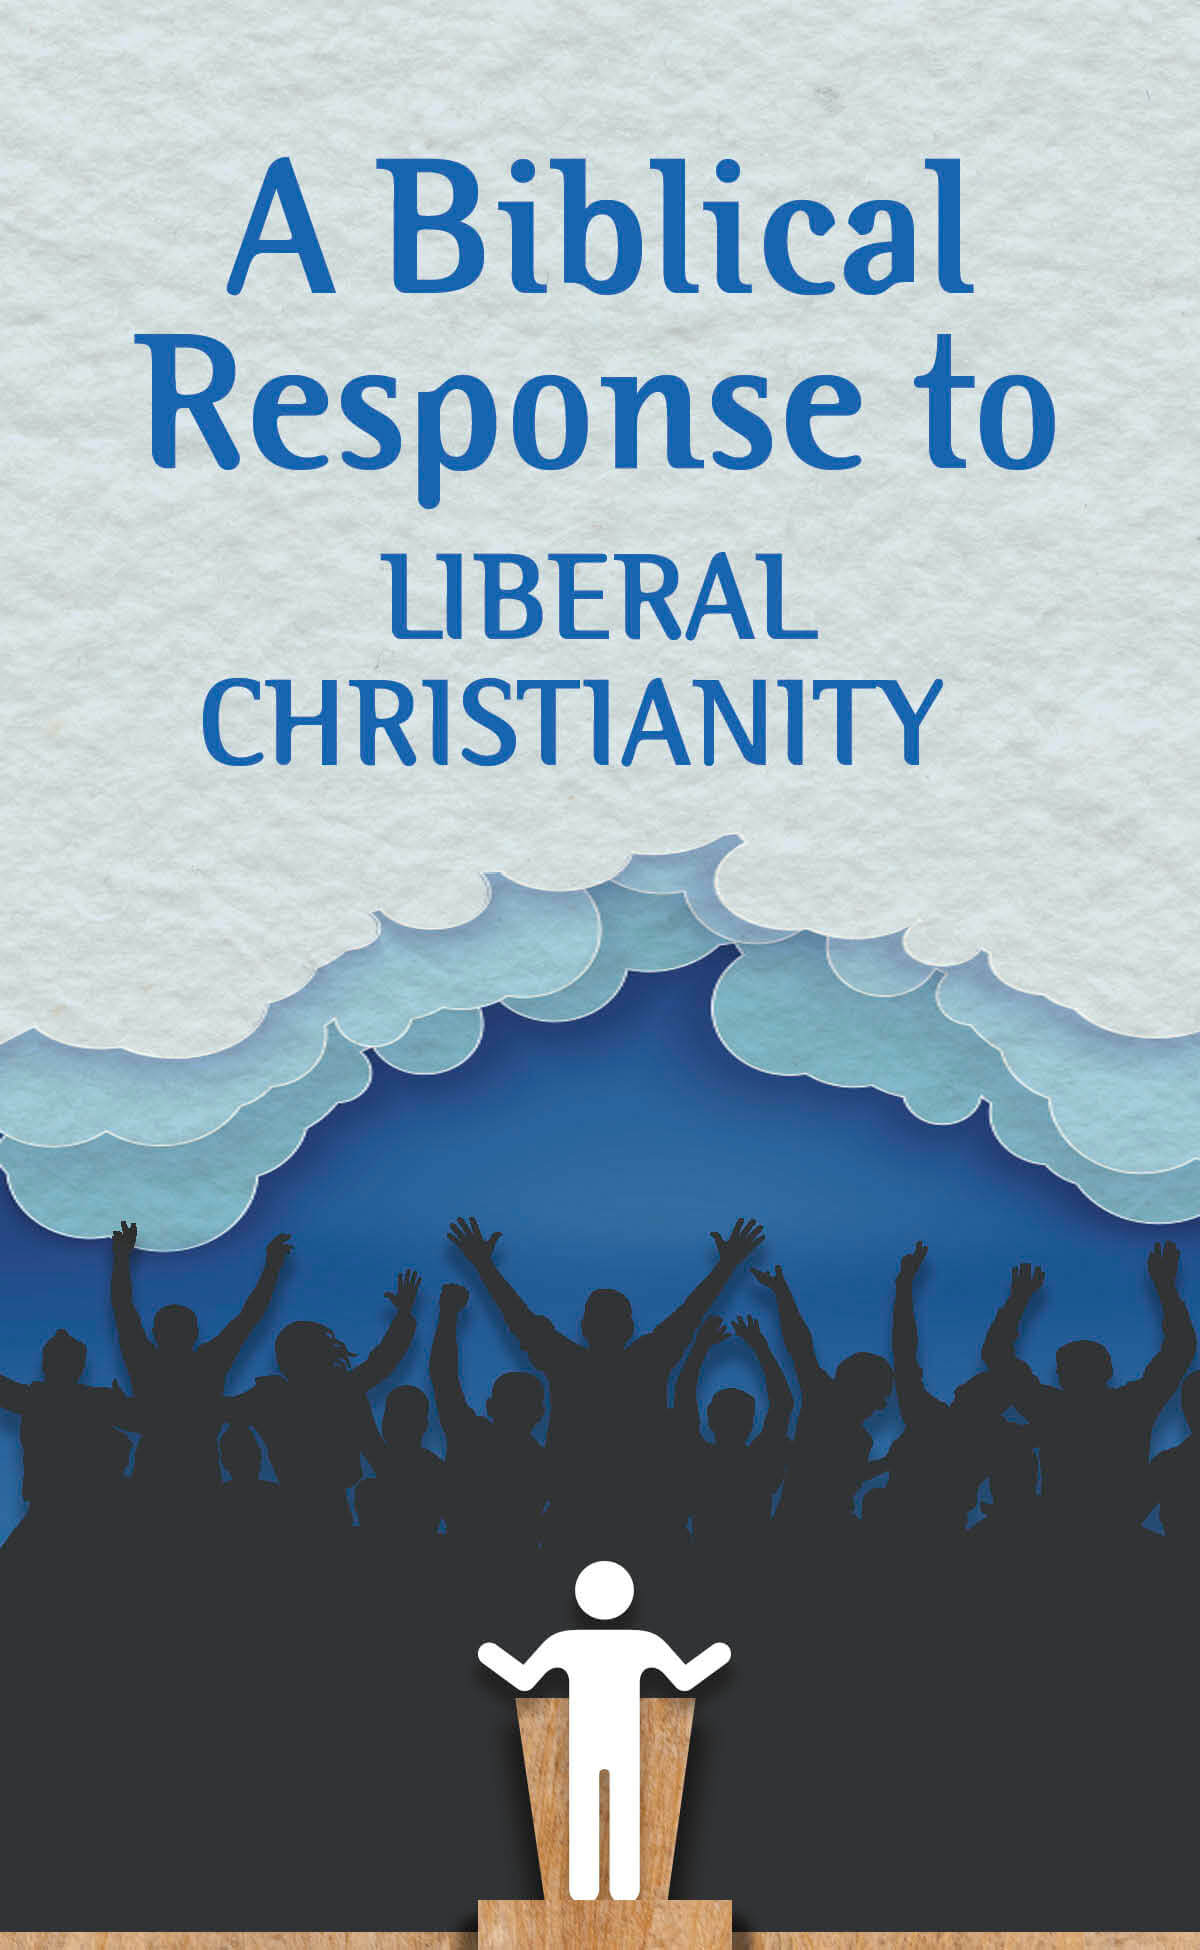 A Biblical Response to Liberal Christianity